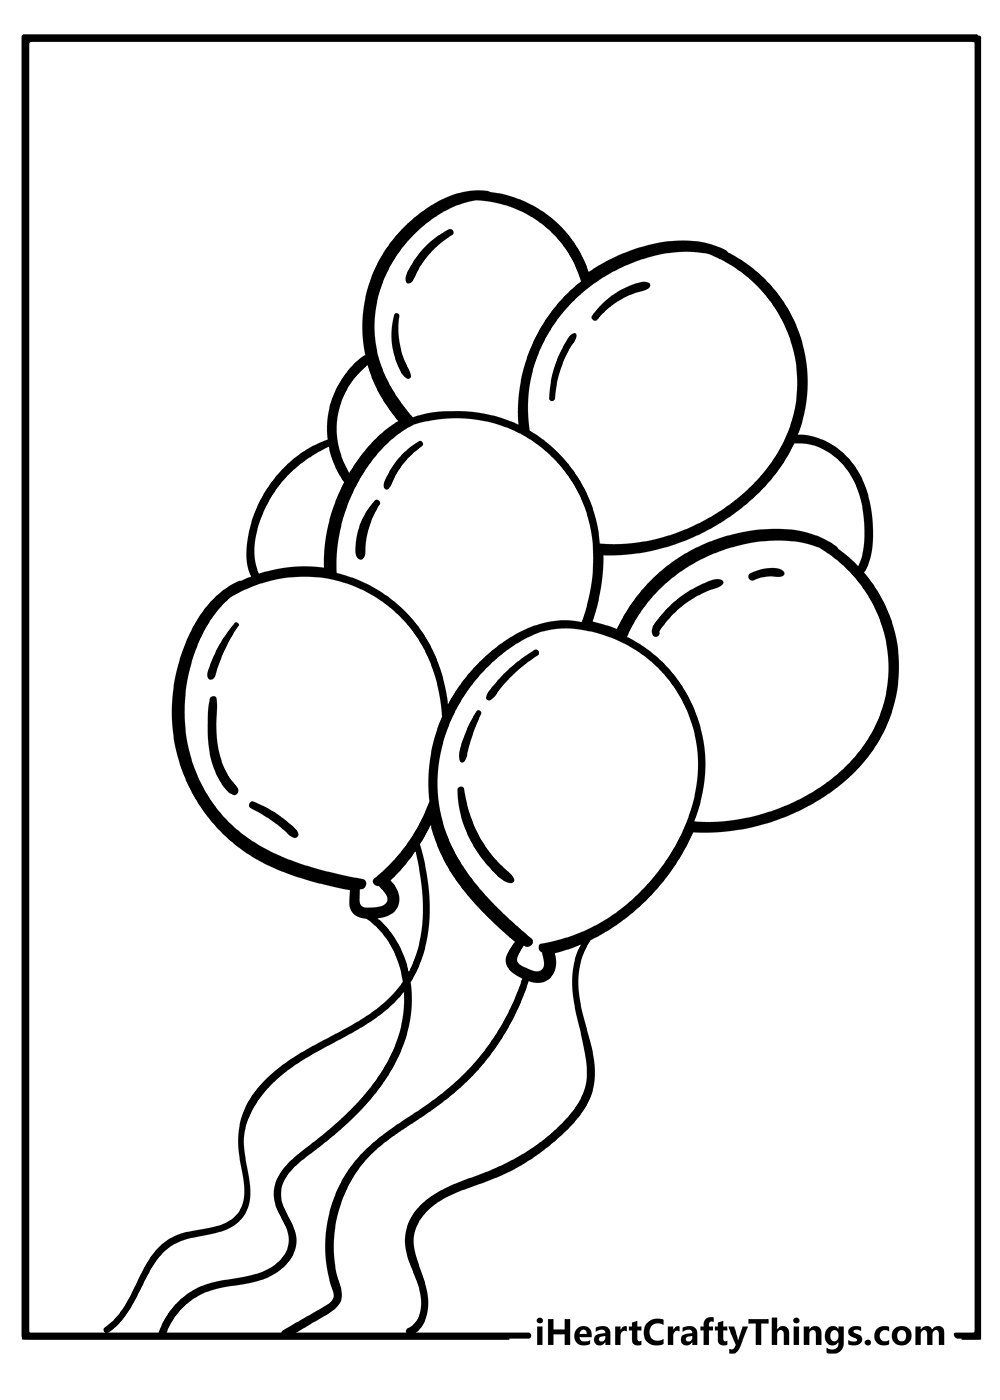 Balloons Easy Coloring Pages